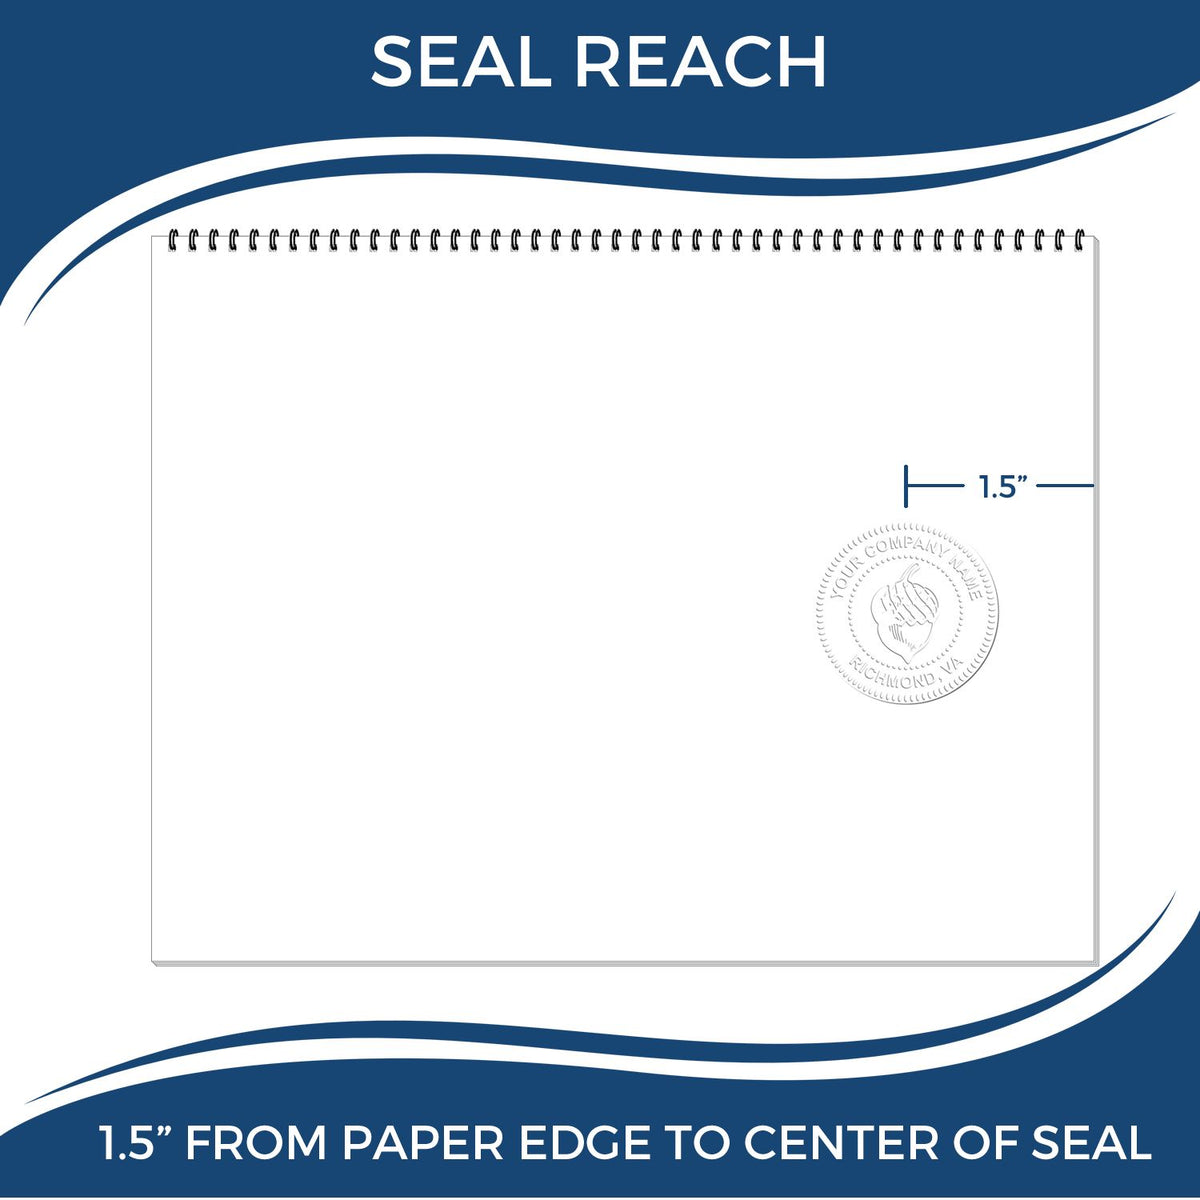 An infographic showing the seal reach which is represented by a ruler and a miniature seal image of the Hybrid New Mexico Architect Seal